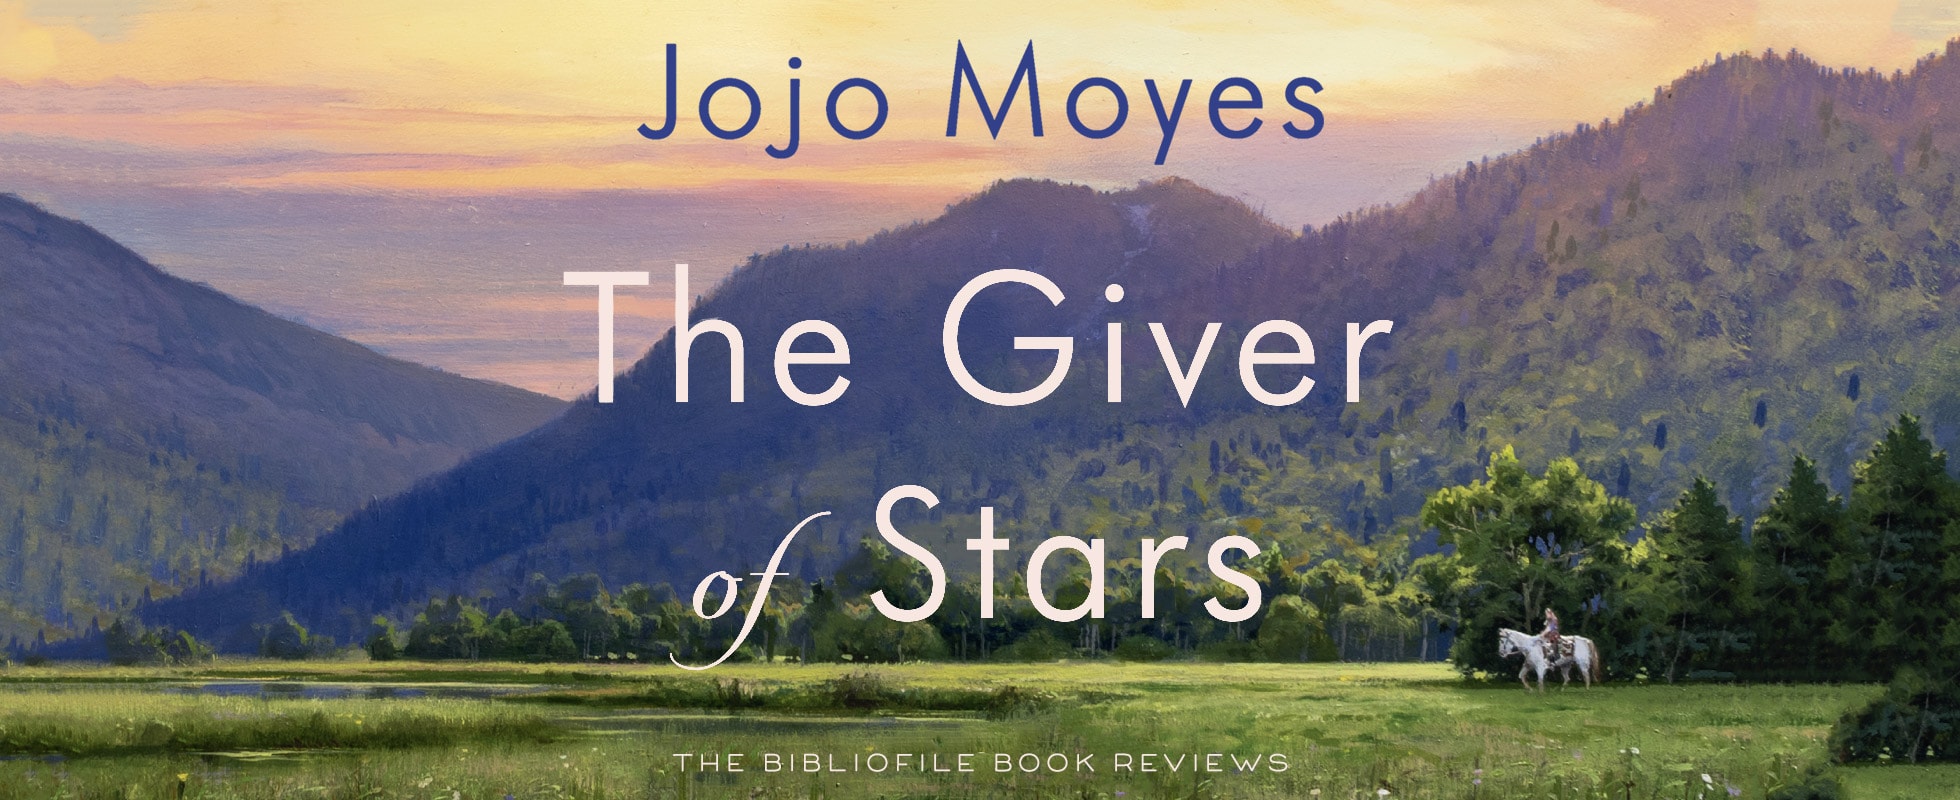 giver of stars jo jo jojo moyes summary review book review synopsis